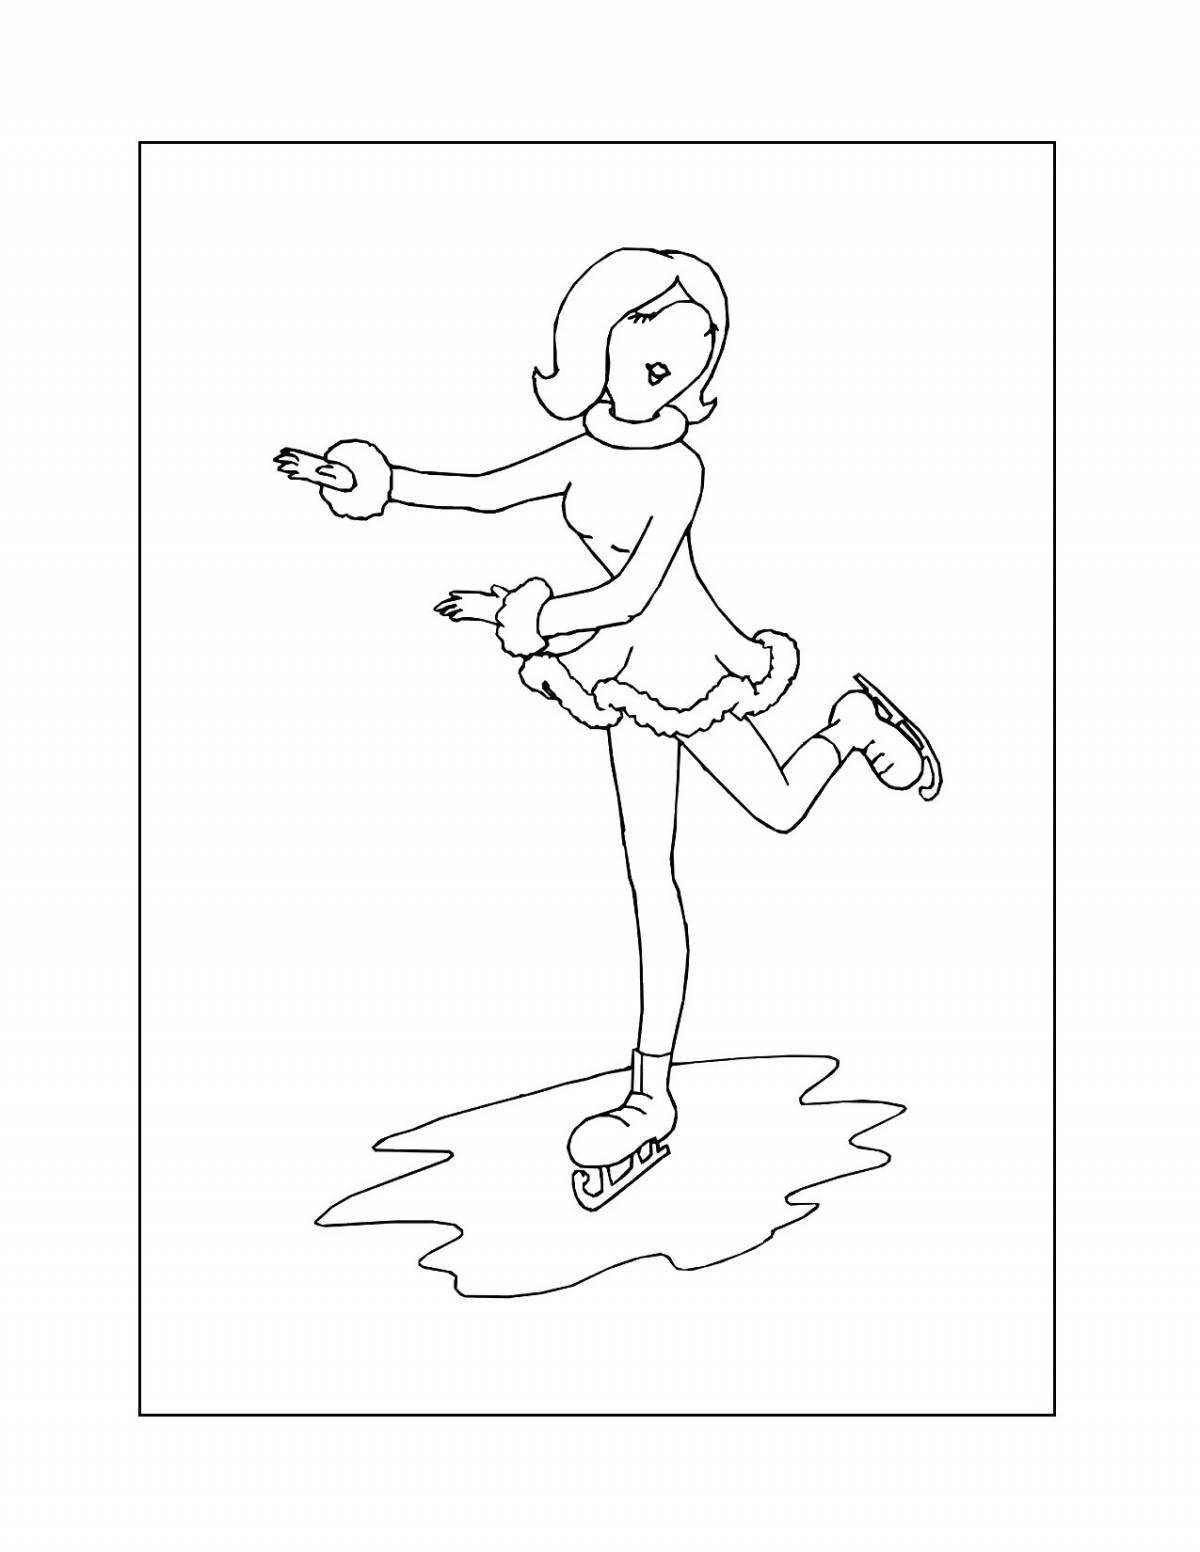 Coloring page wild girl on skates